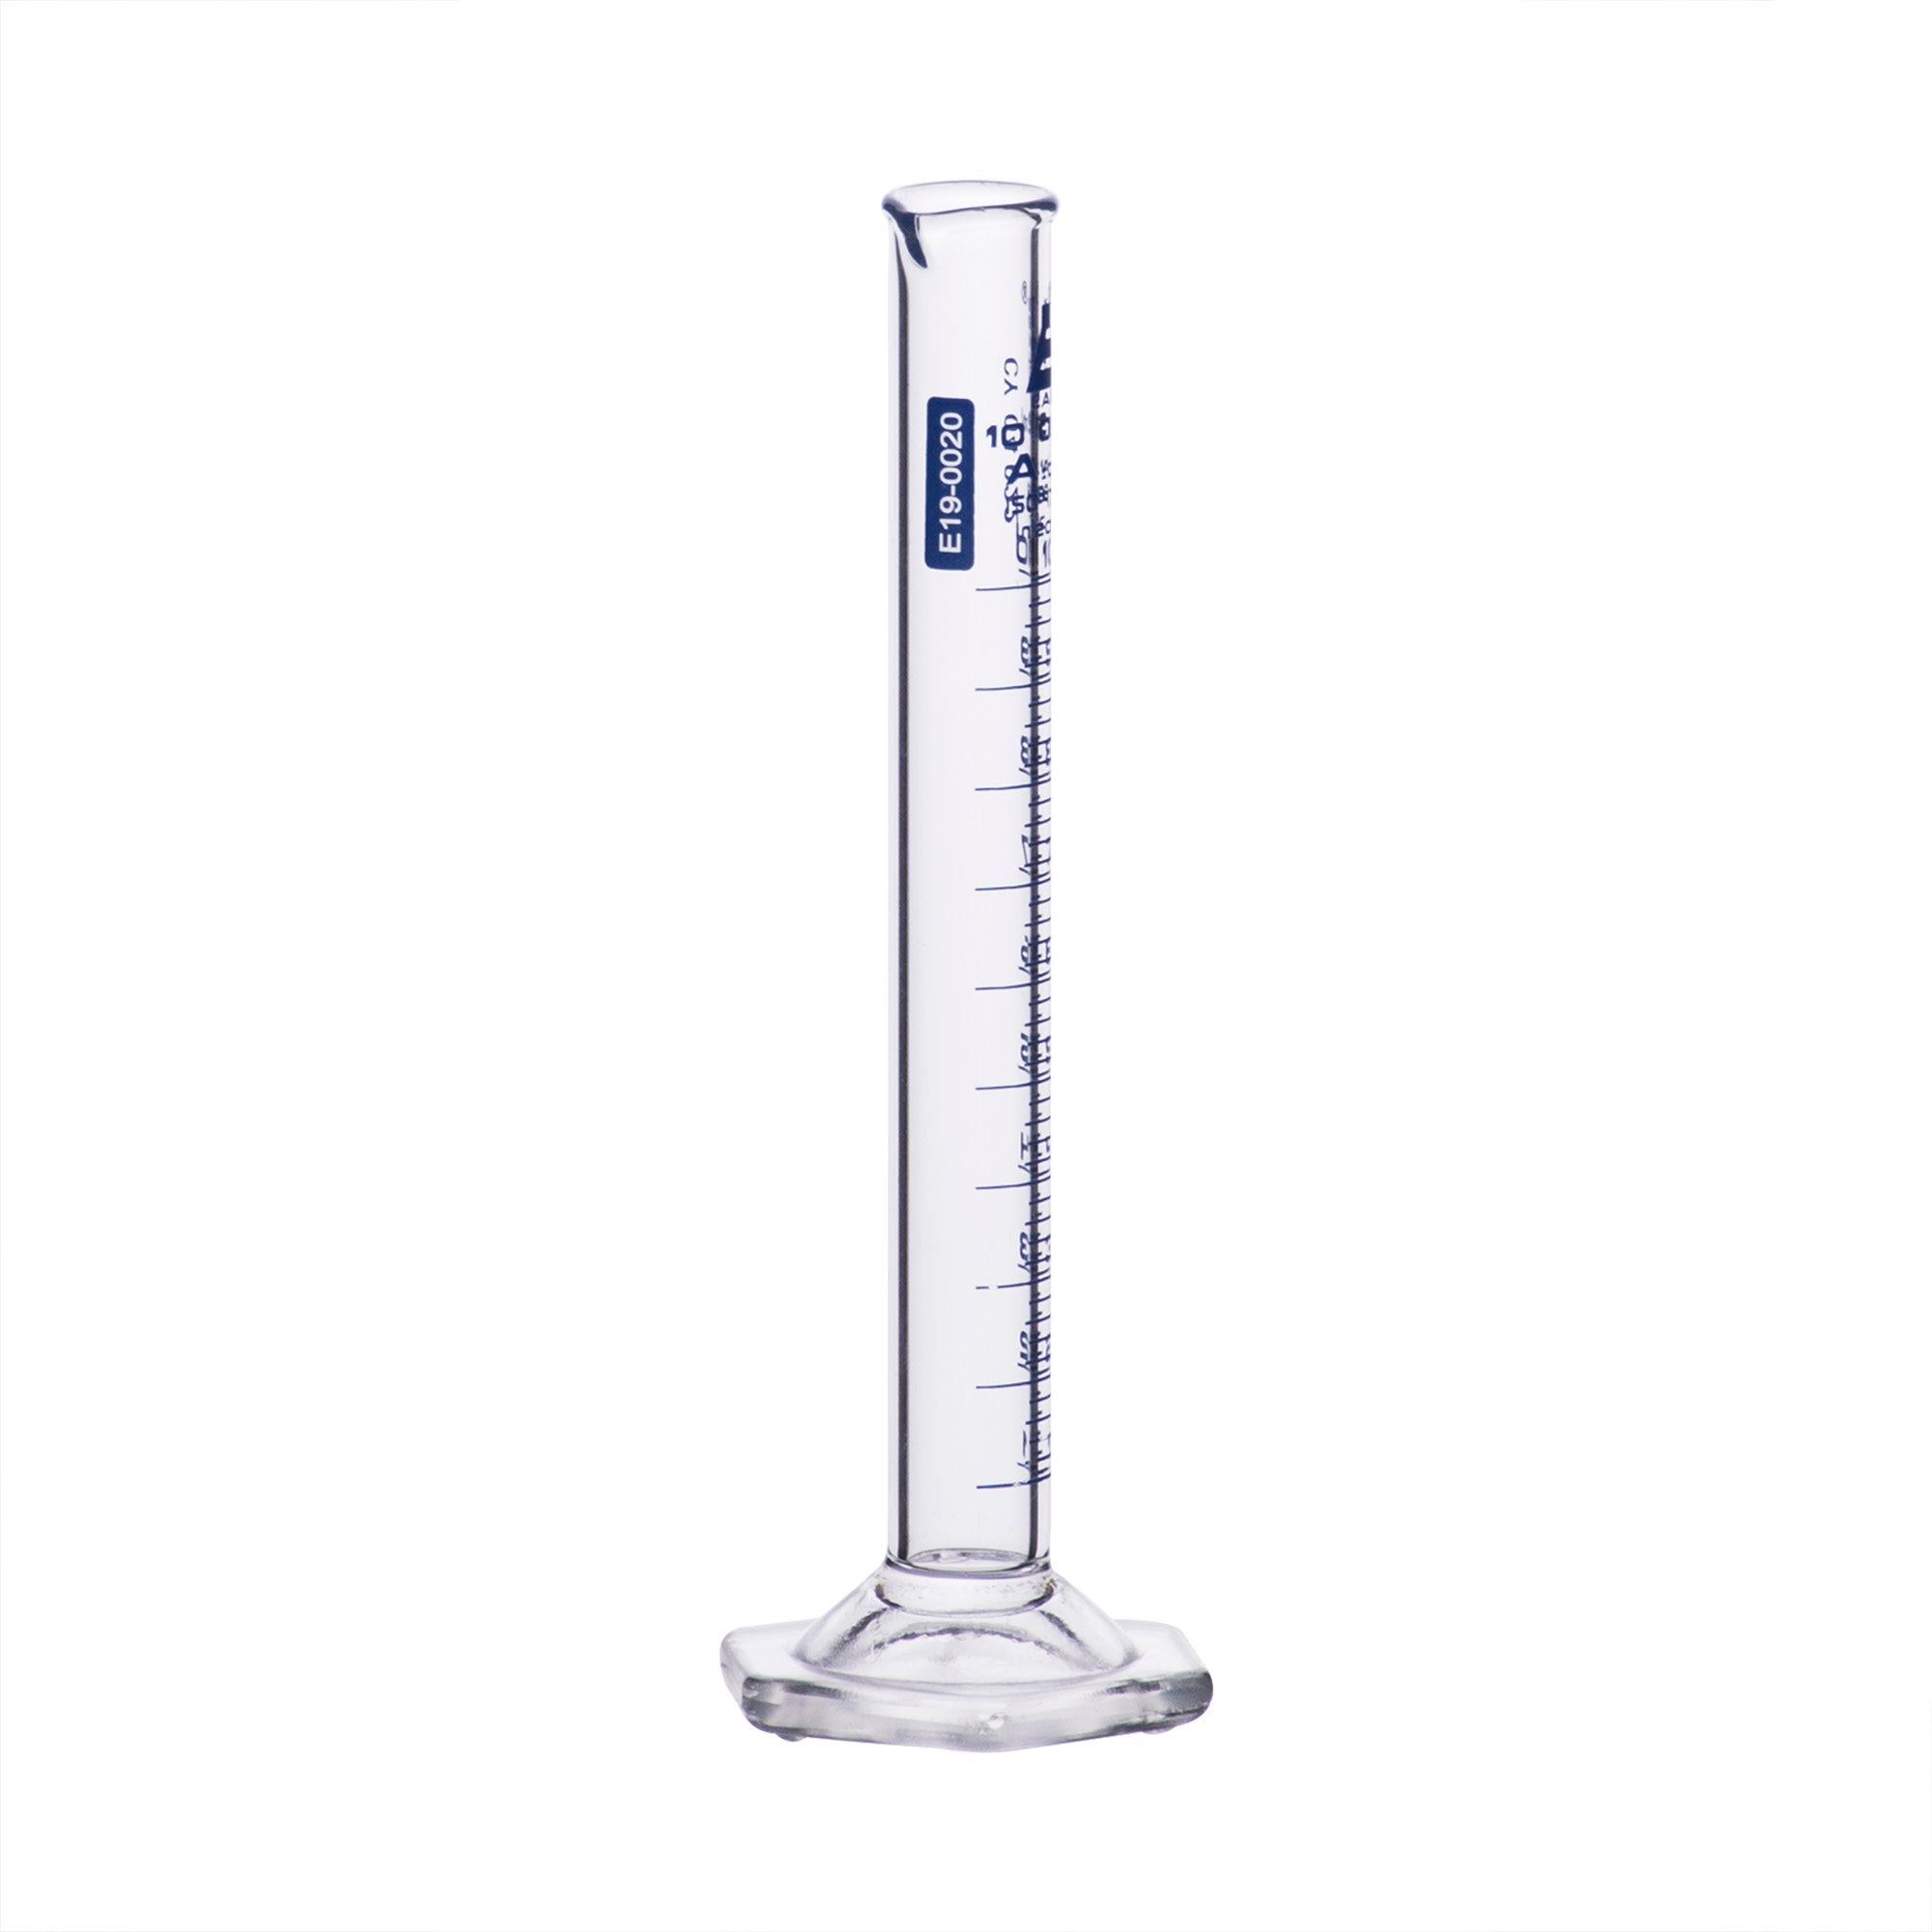 Borosilicate Glass Graduated Cylinder with Hexagonal Base, 10 ml, Class A with Individual Work Certificate